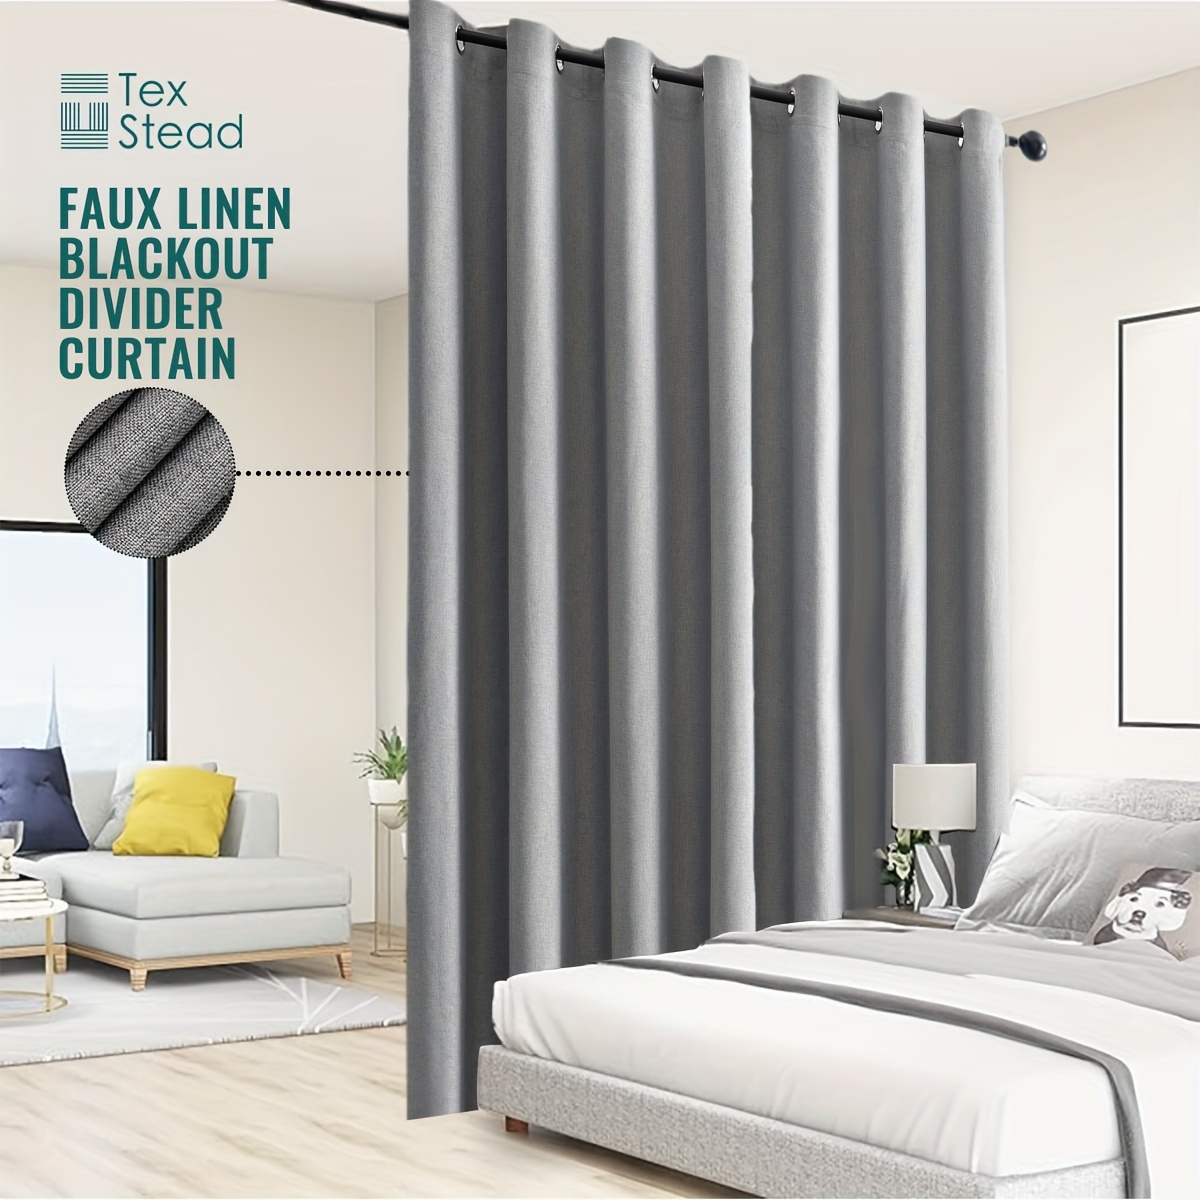 Privacy Room Divider Curtains for Office Bedroom Separation Sound